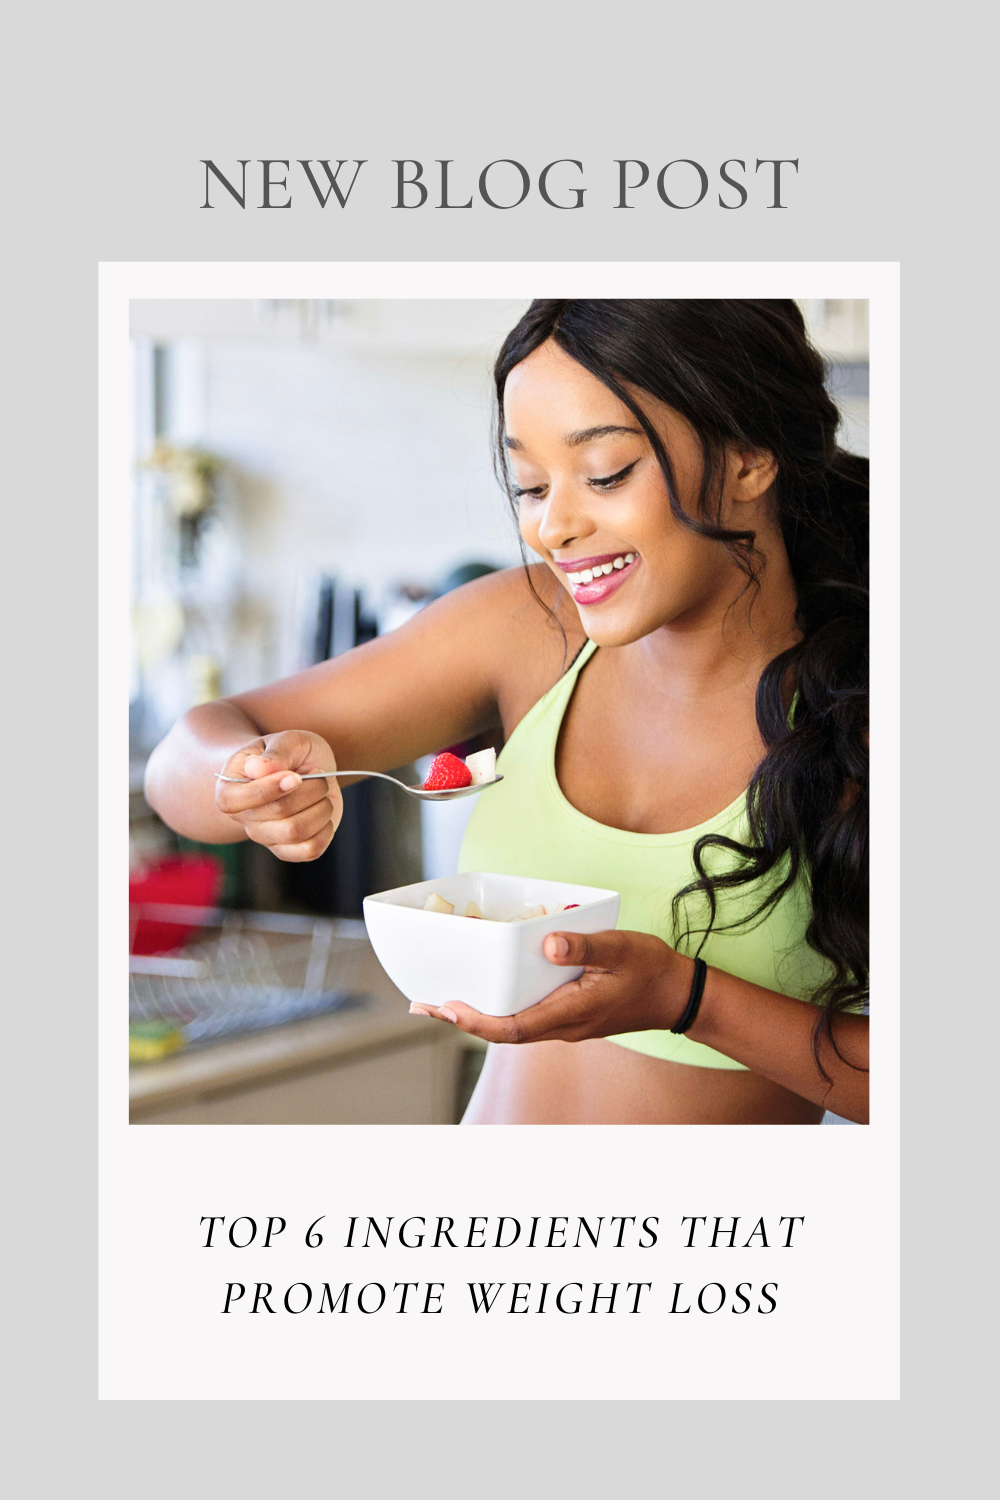 Top 6 Ingredients That Promote Weight Loss